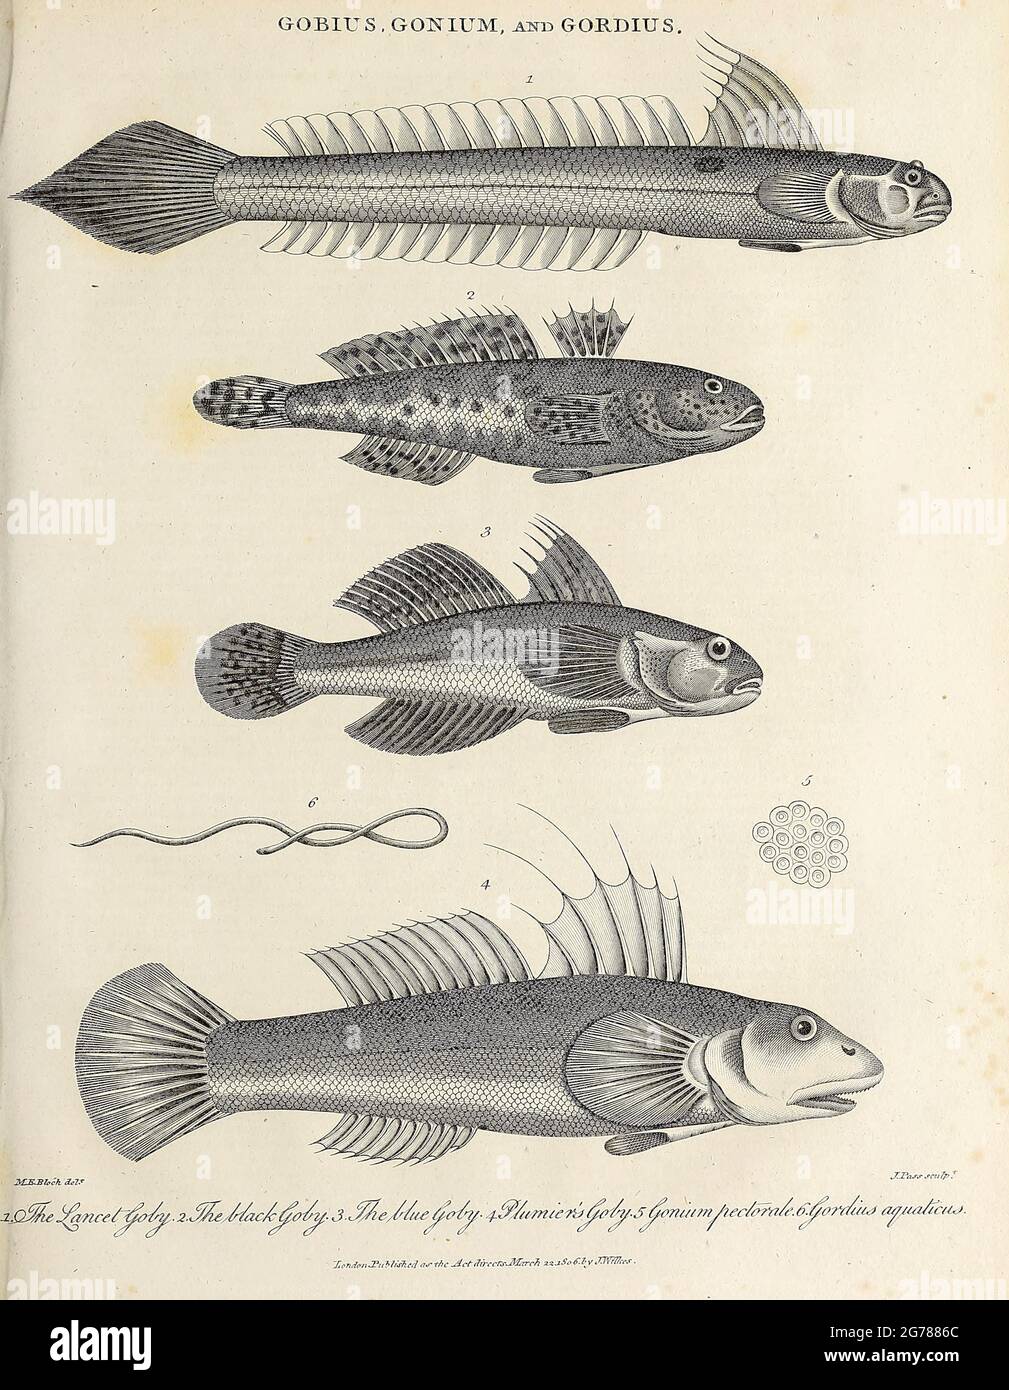 Gobius (Gobies), Gonium (Algae) and Gordius (worms) Copperplate engraving From the Encyclopaedia Londinensis or, Universal dictionary of arts, sciences, and literature; Volume VIII;  Edited by Wilkes, John. Published in London in 1810. Stock Photo